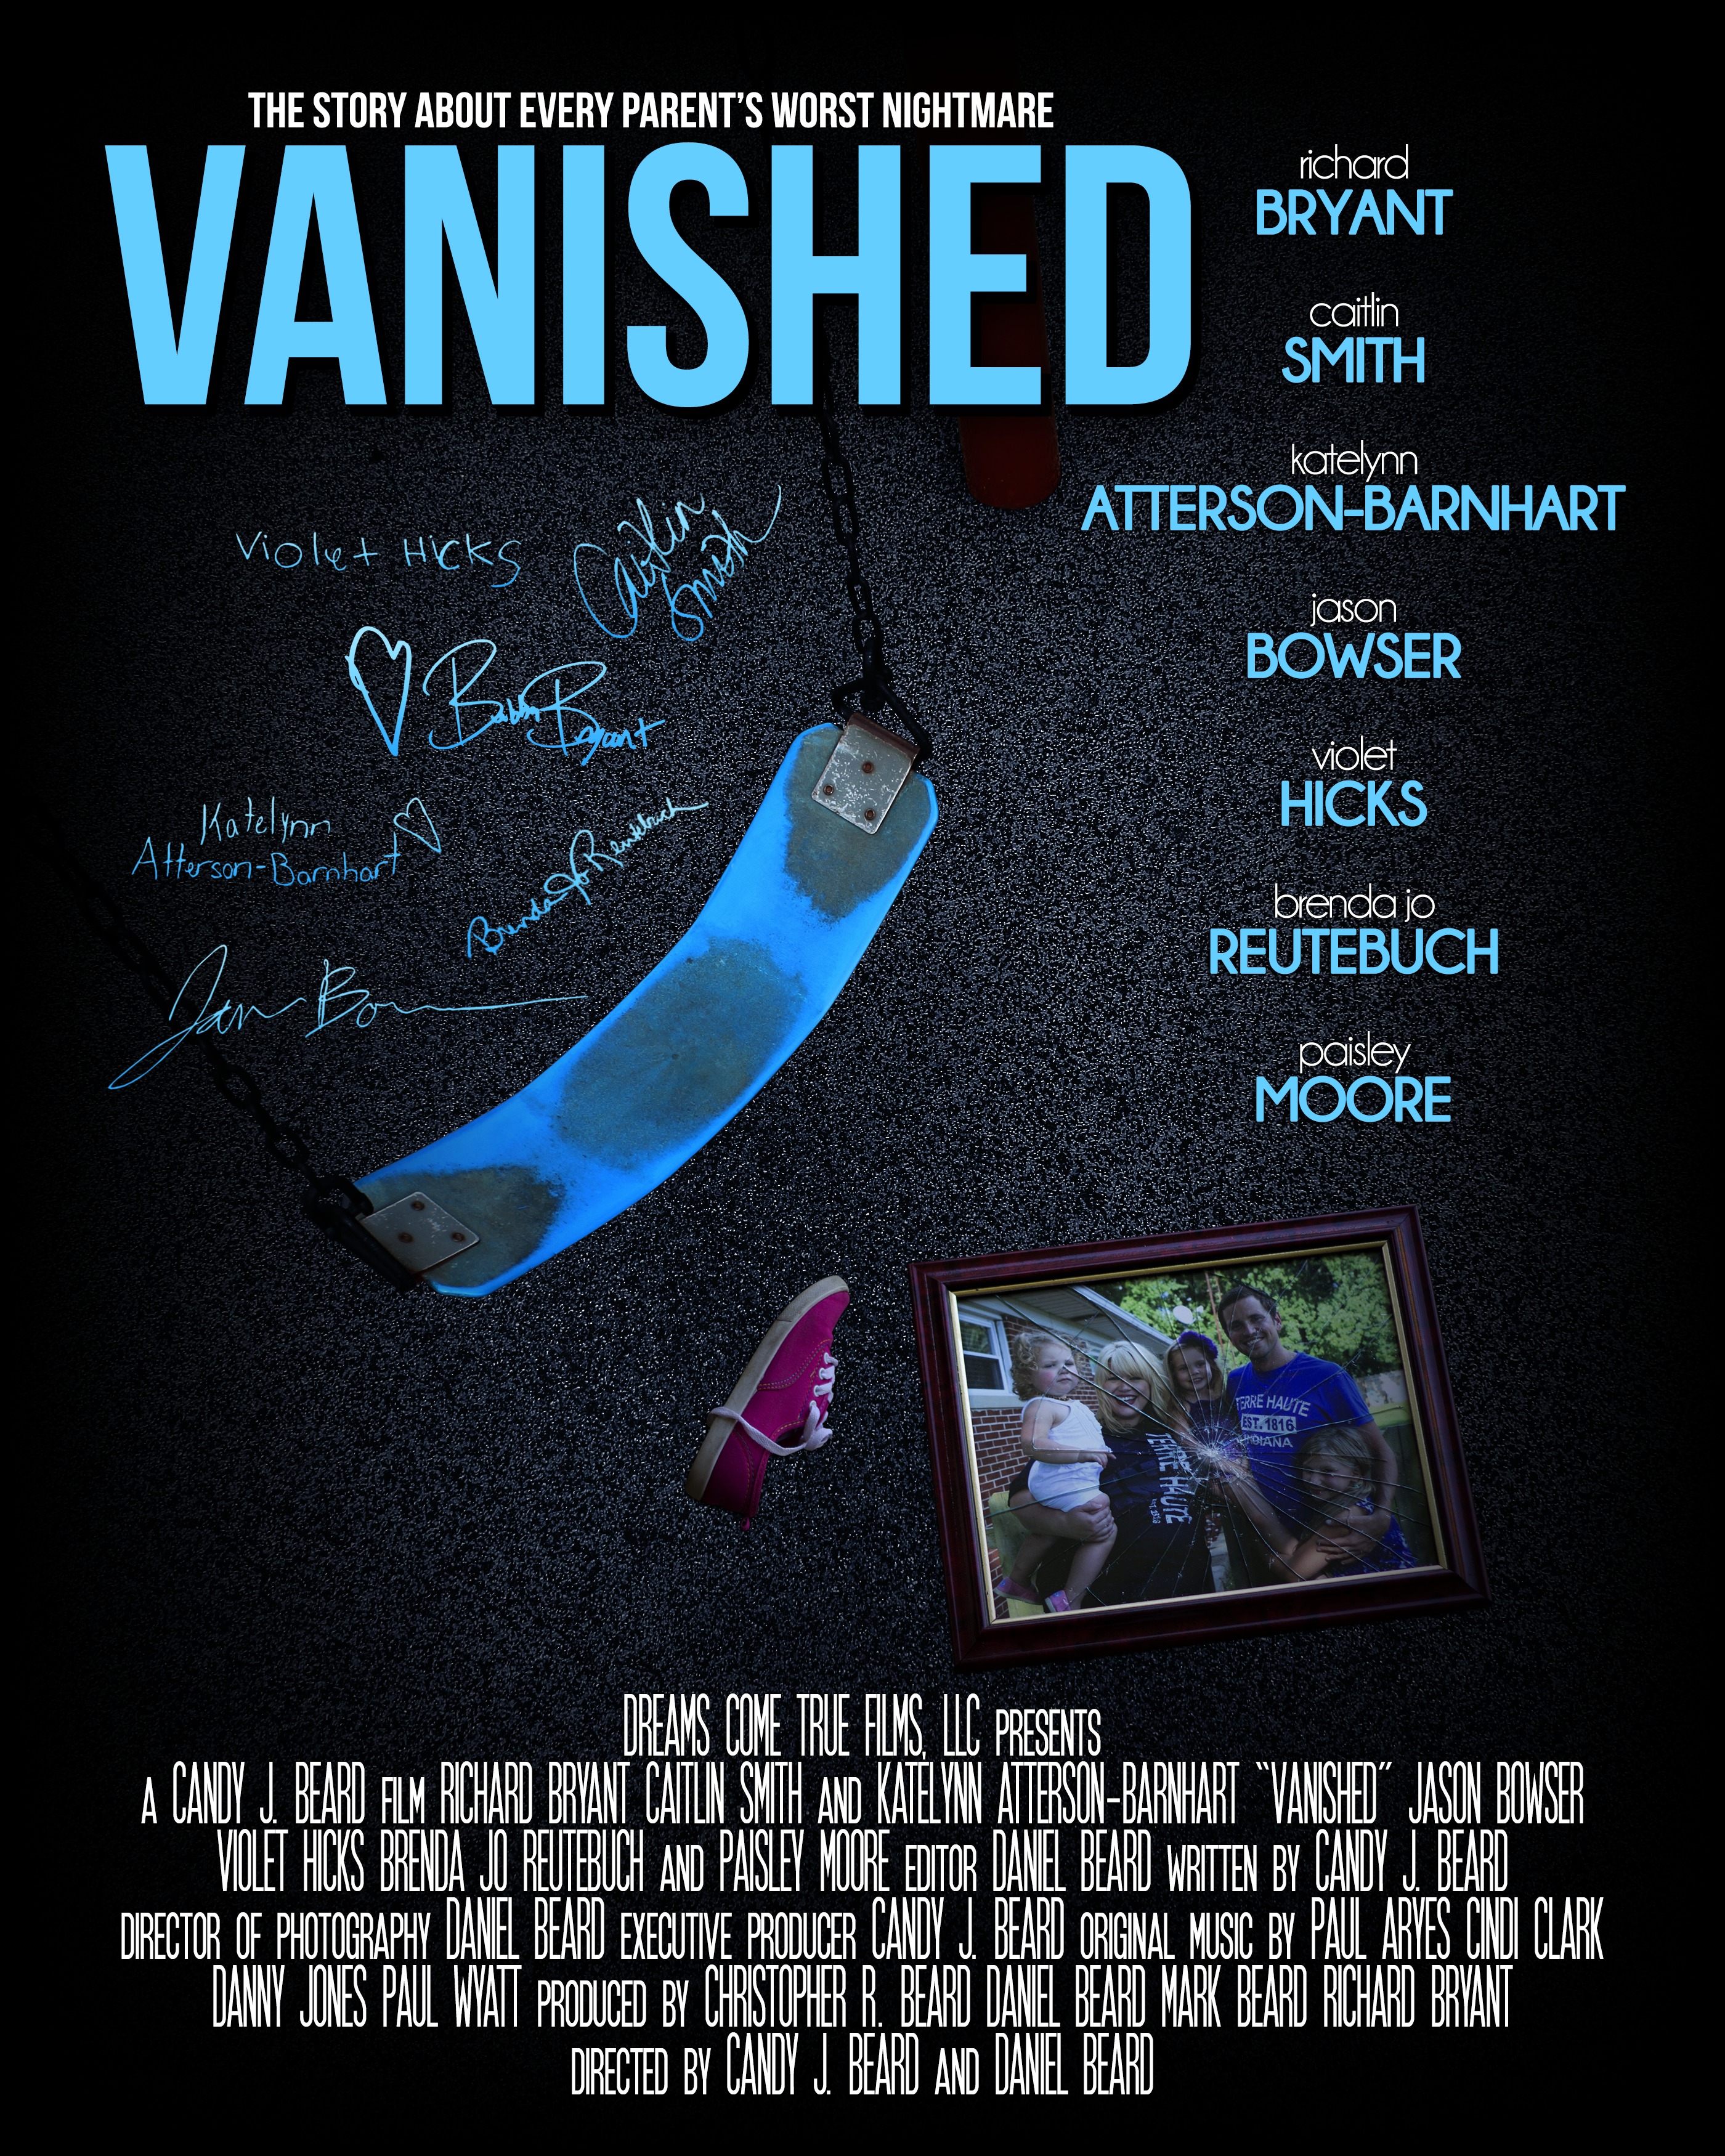 The official Vanished poster.